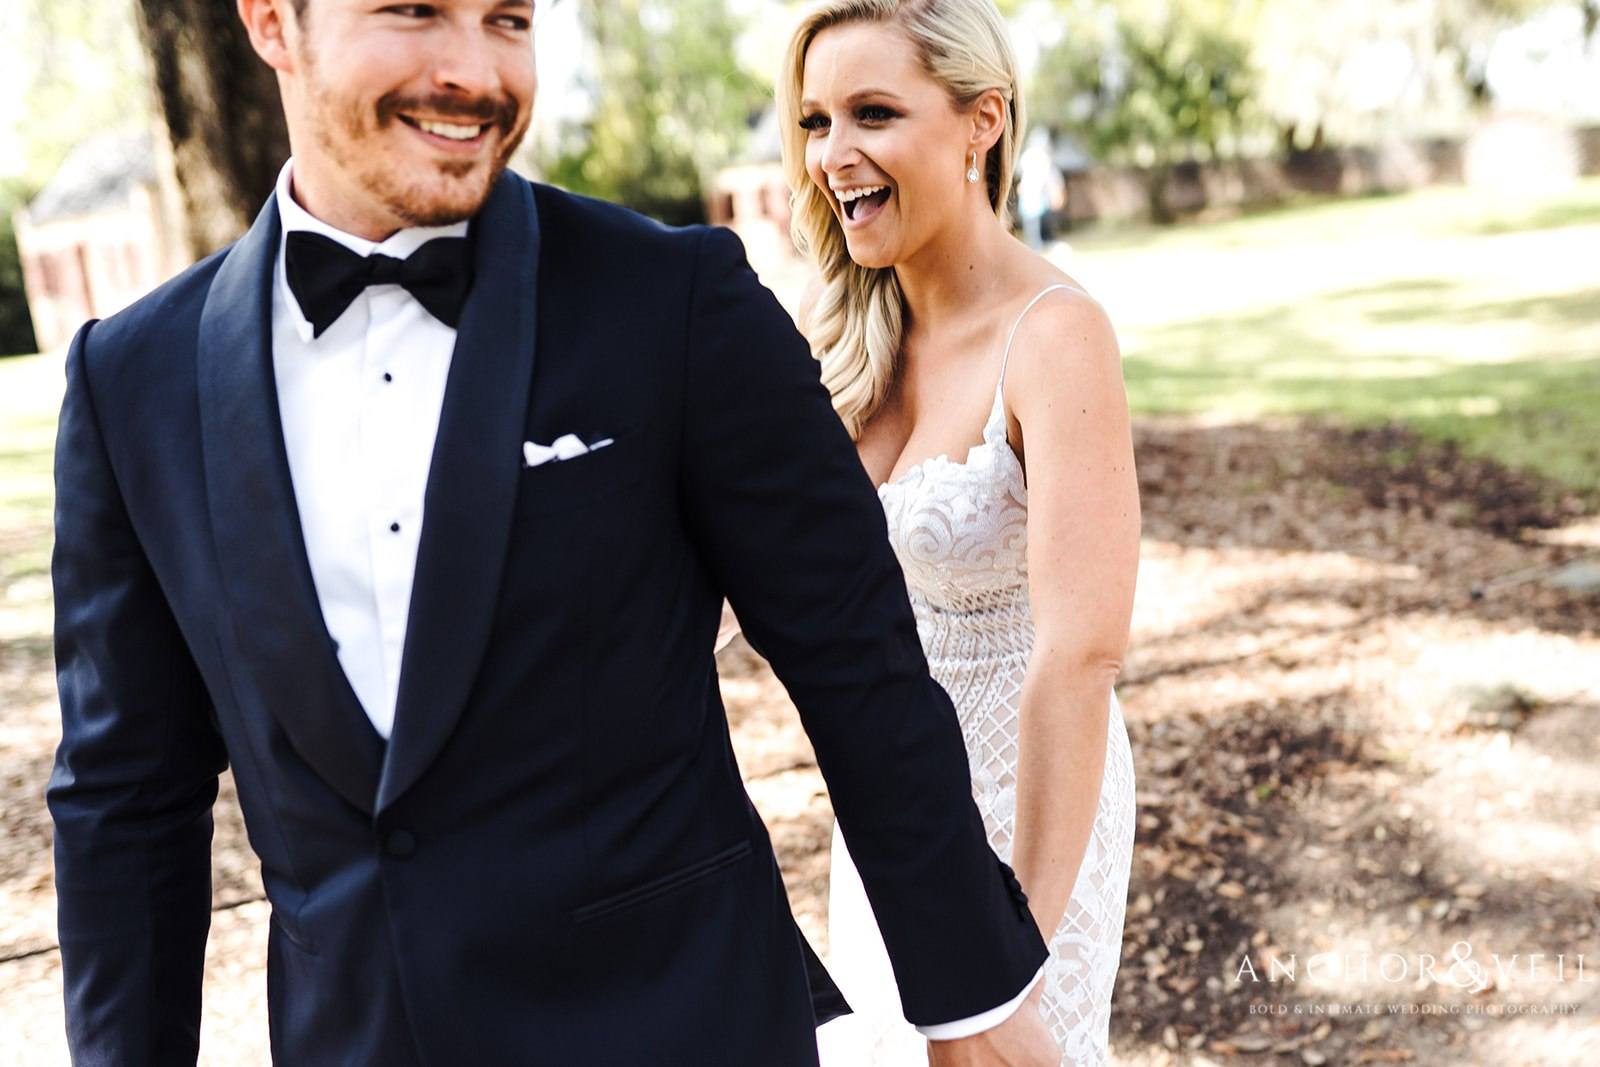 The "first look" for the bride and groom at the Boone Hall Plantation Wedding 